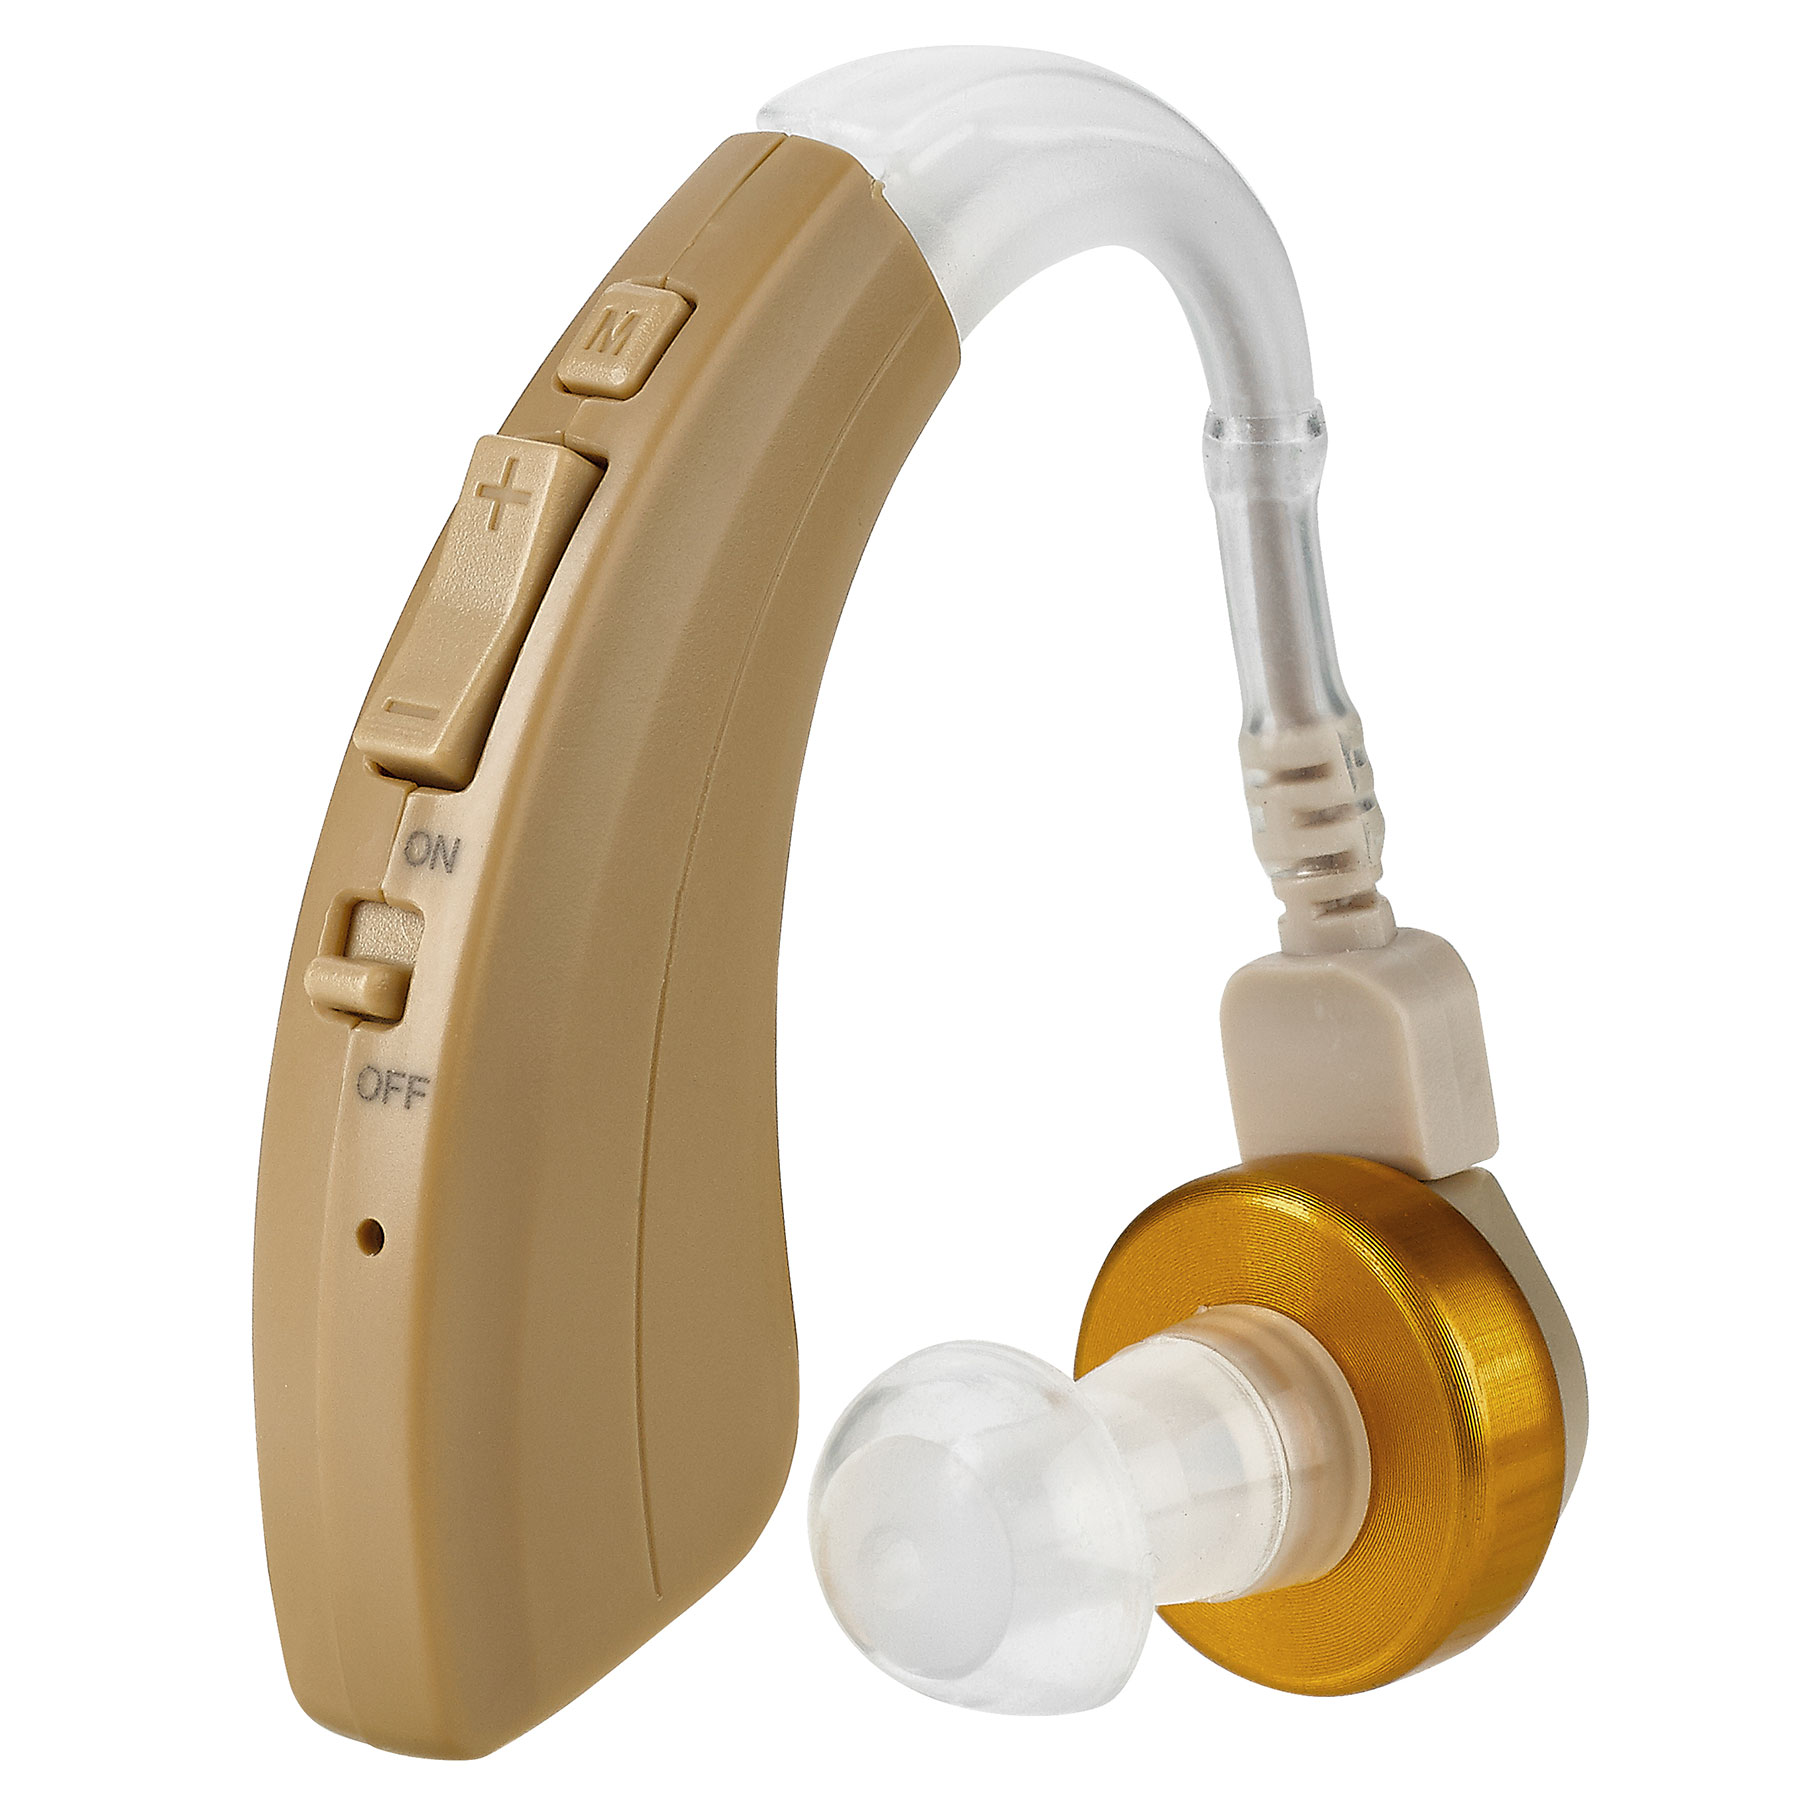 Hearing Aids for Adults